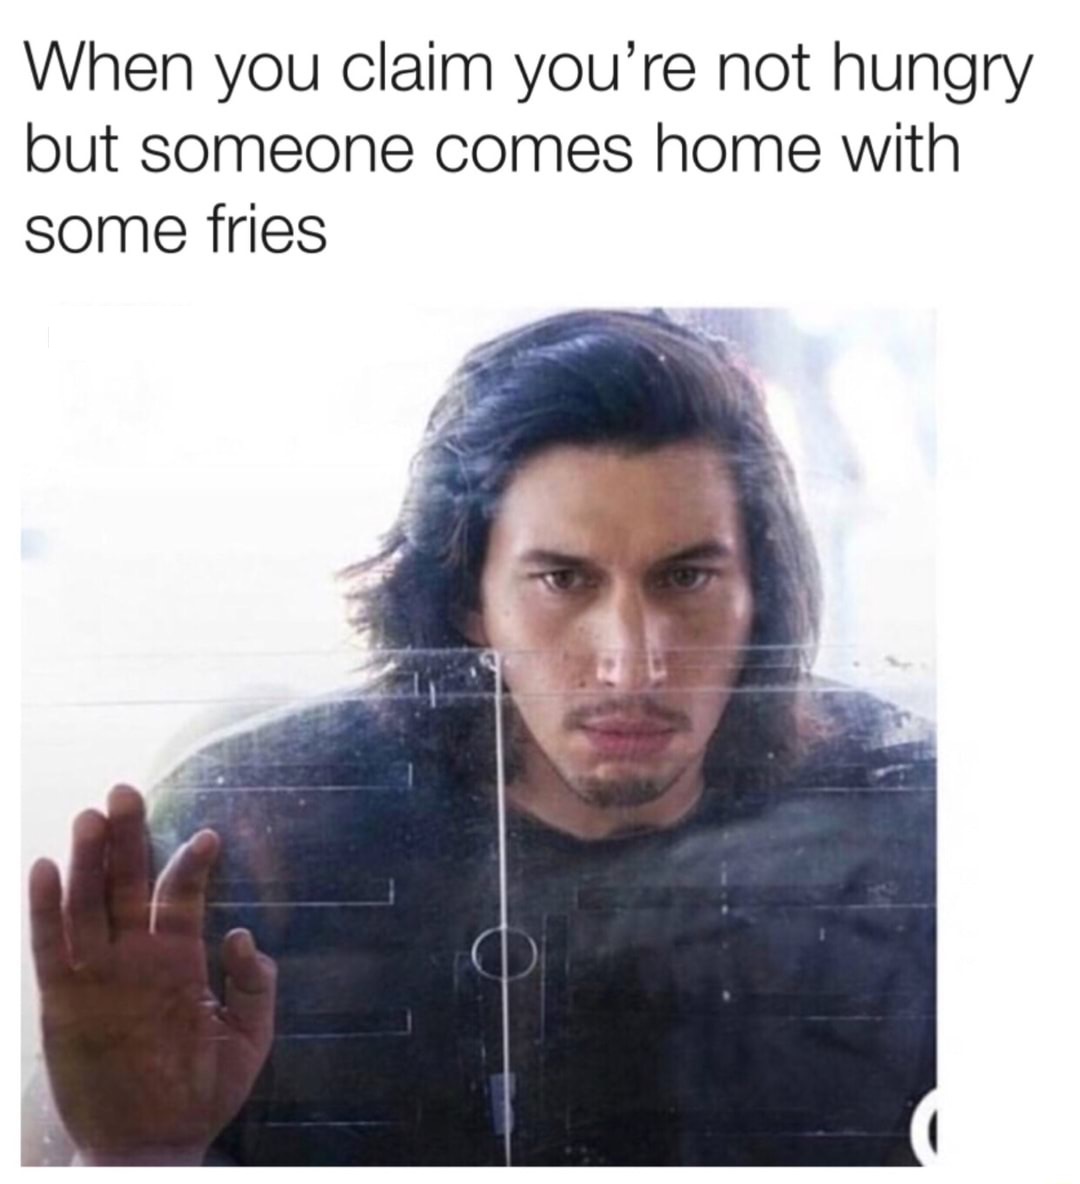 not hungry meme - When you claim you're not hungry but someone comes home with some fries